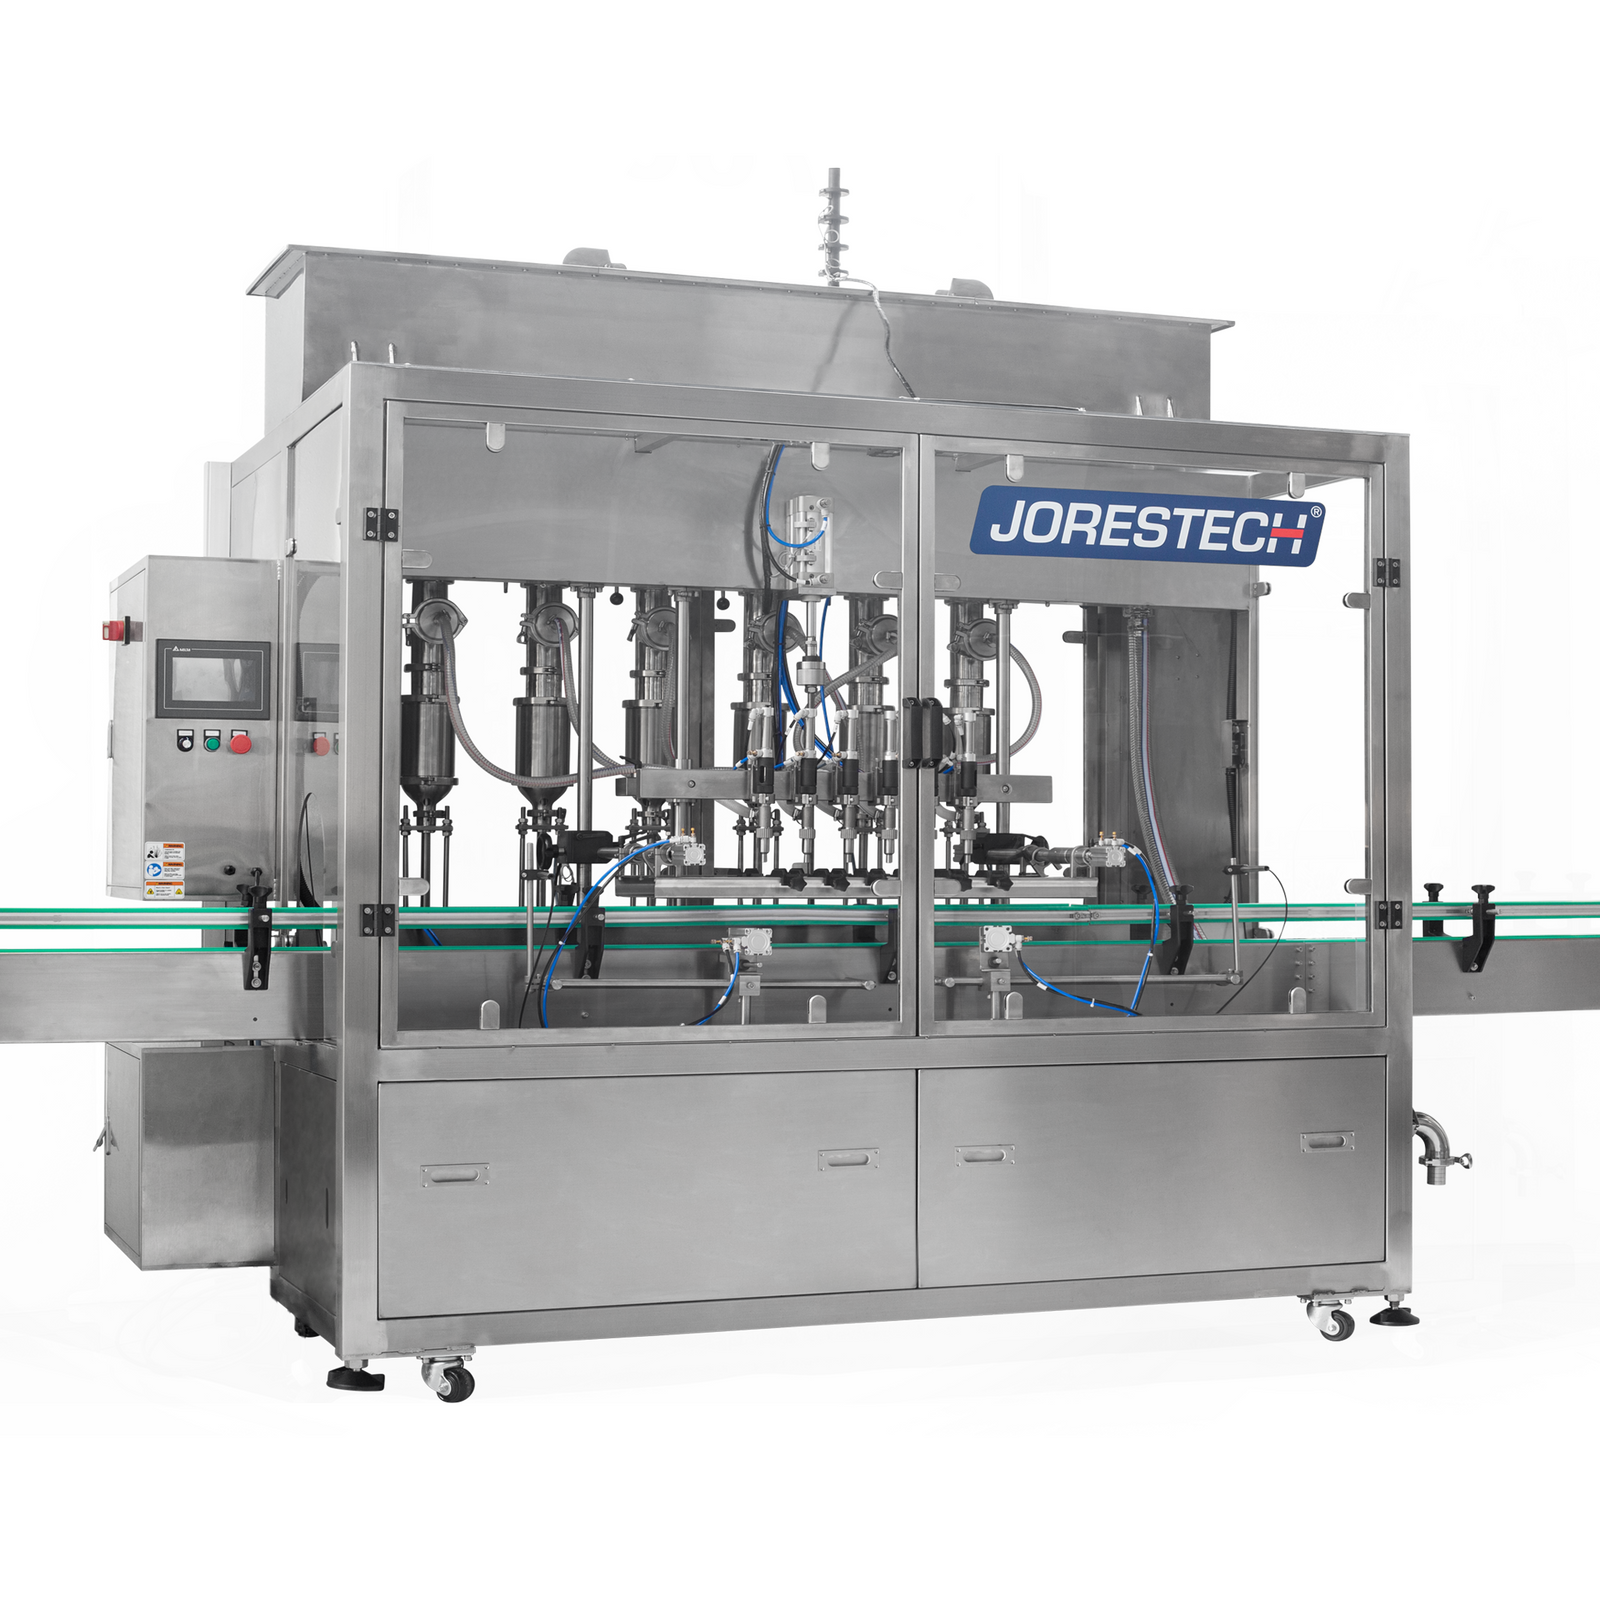 Frontal image of the 6 head stainless steel inline JORESTECH piston filling machine with conveyor over white background